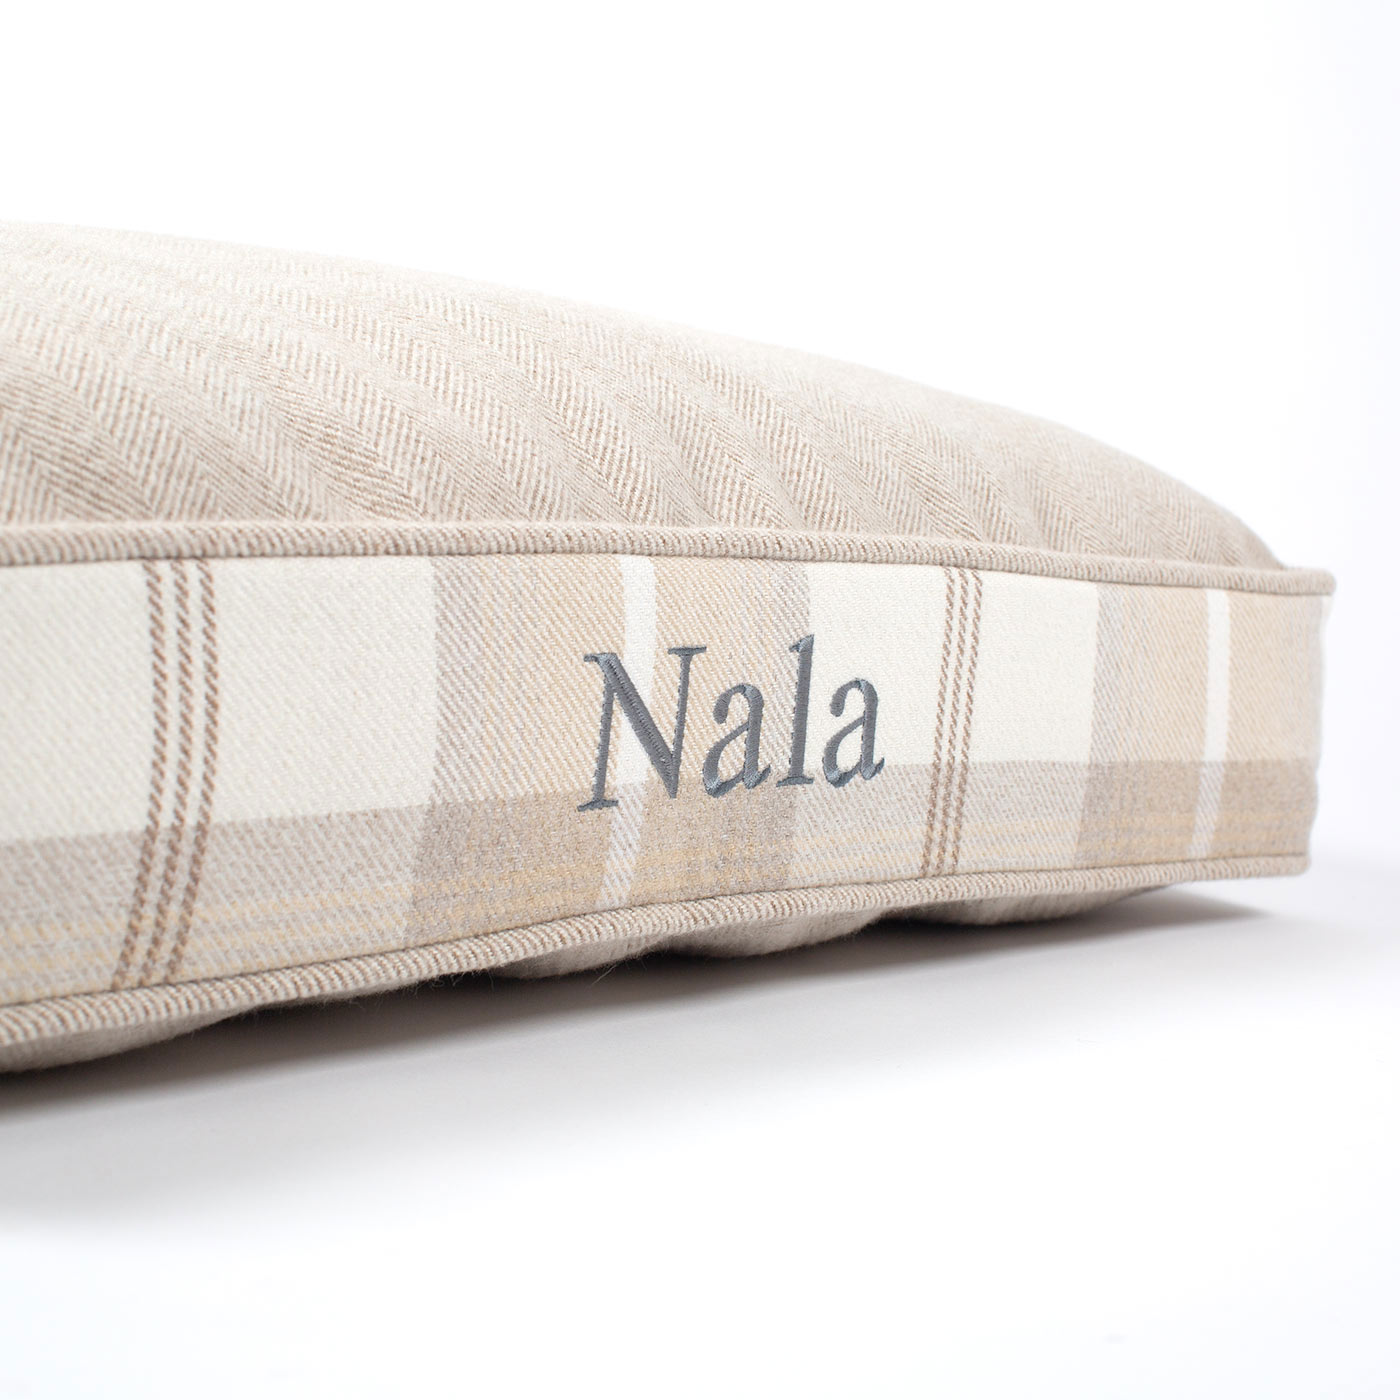 Luxury Dog Crate Cushion, Balmoral Natural Tweed Crate Cushion The Perfect Dog Crate Accessory, Available To Personalise Now at Lords & Labradors